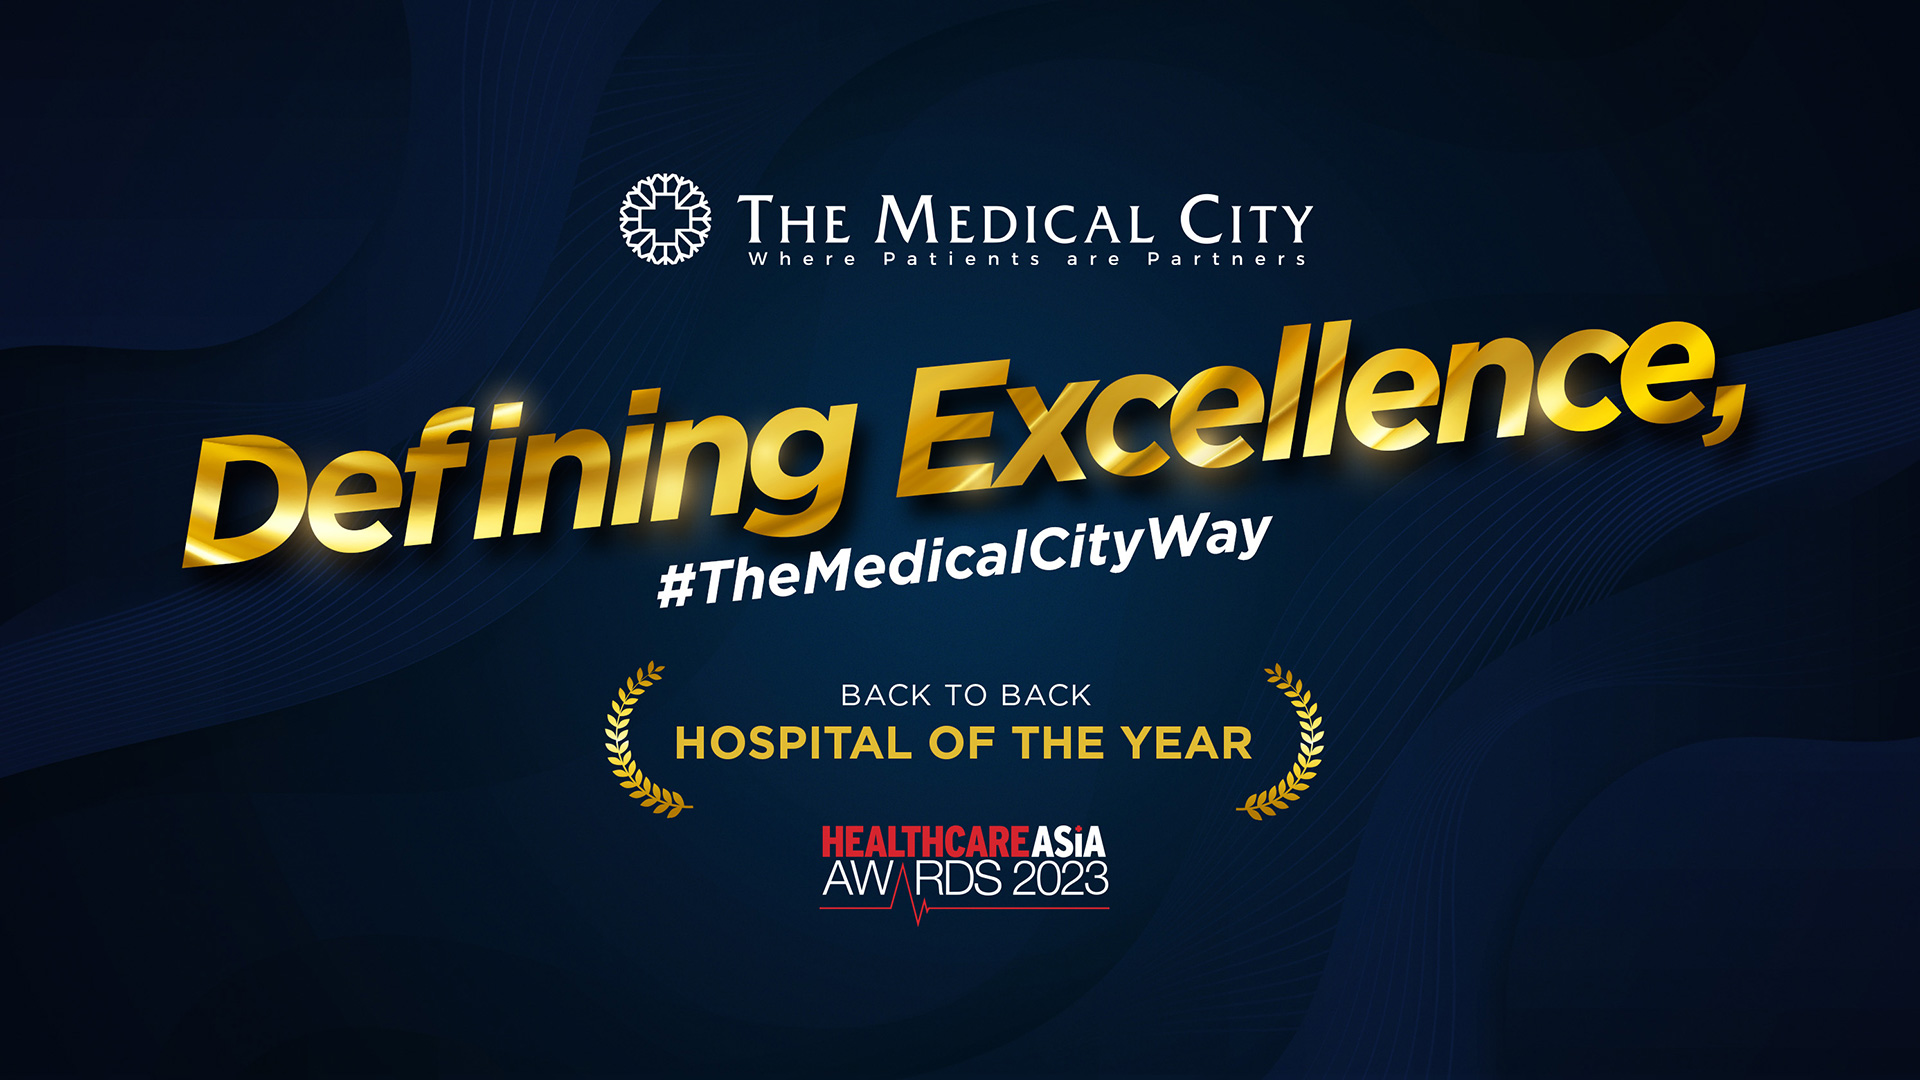 tmc hospital of the year award 2023 from healthcare asia